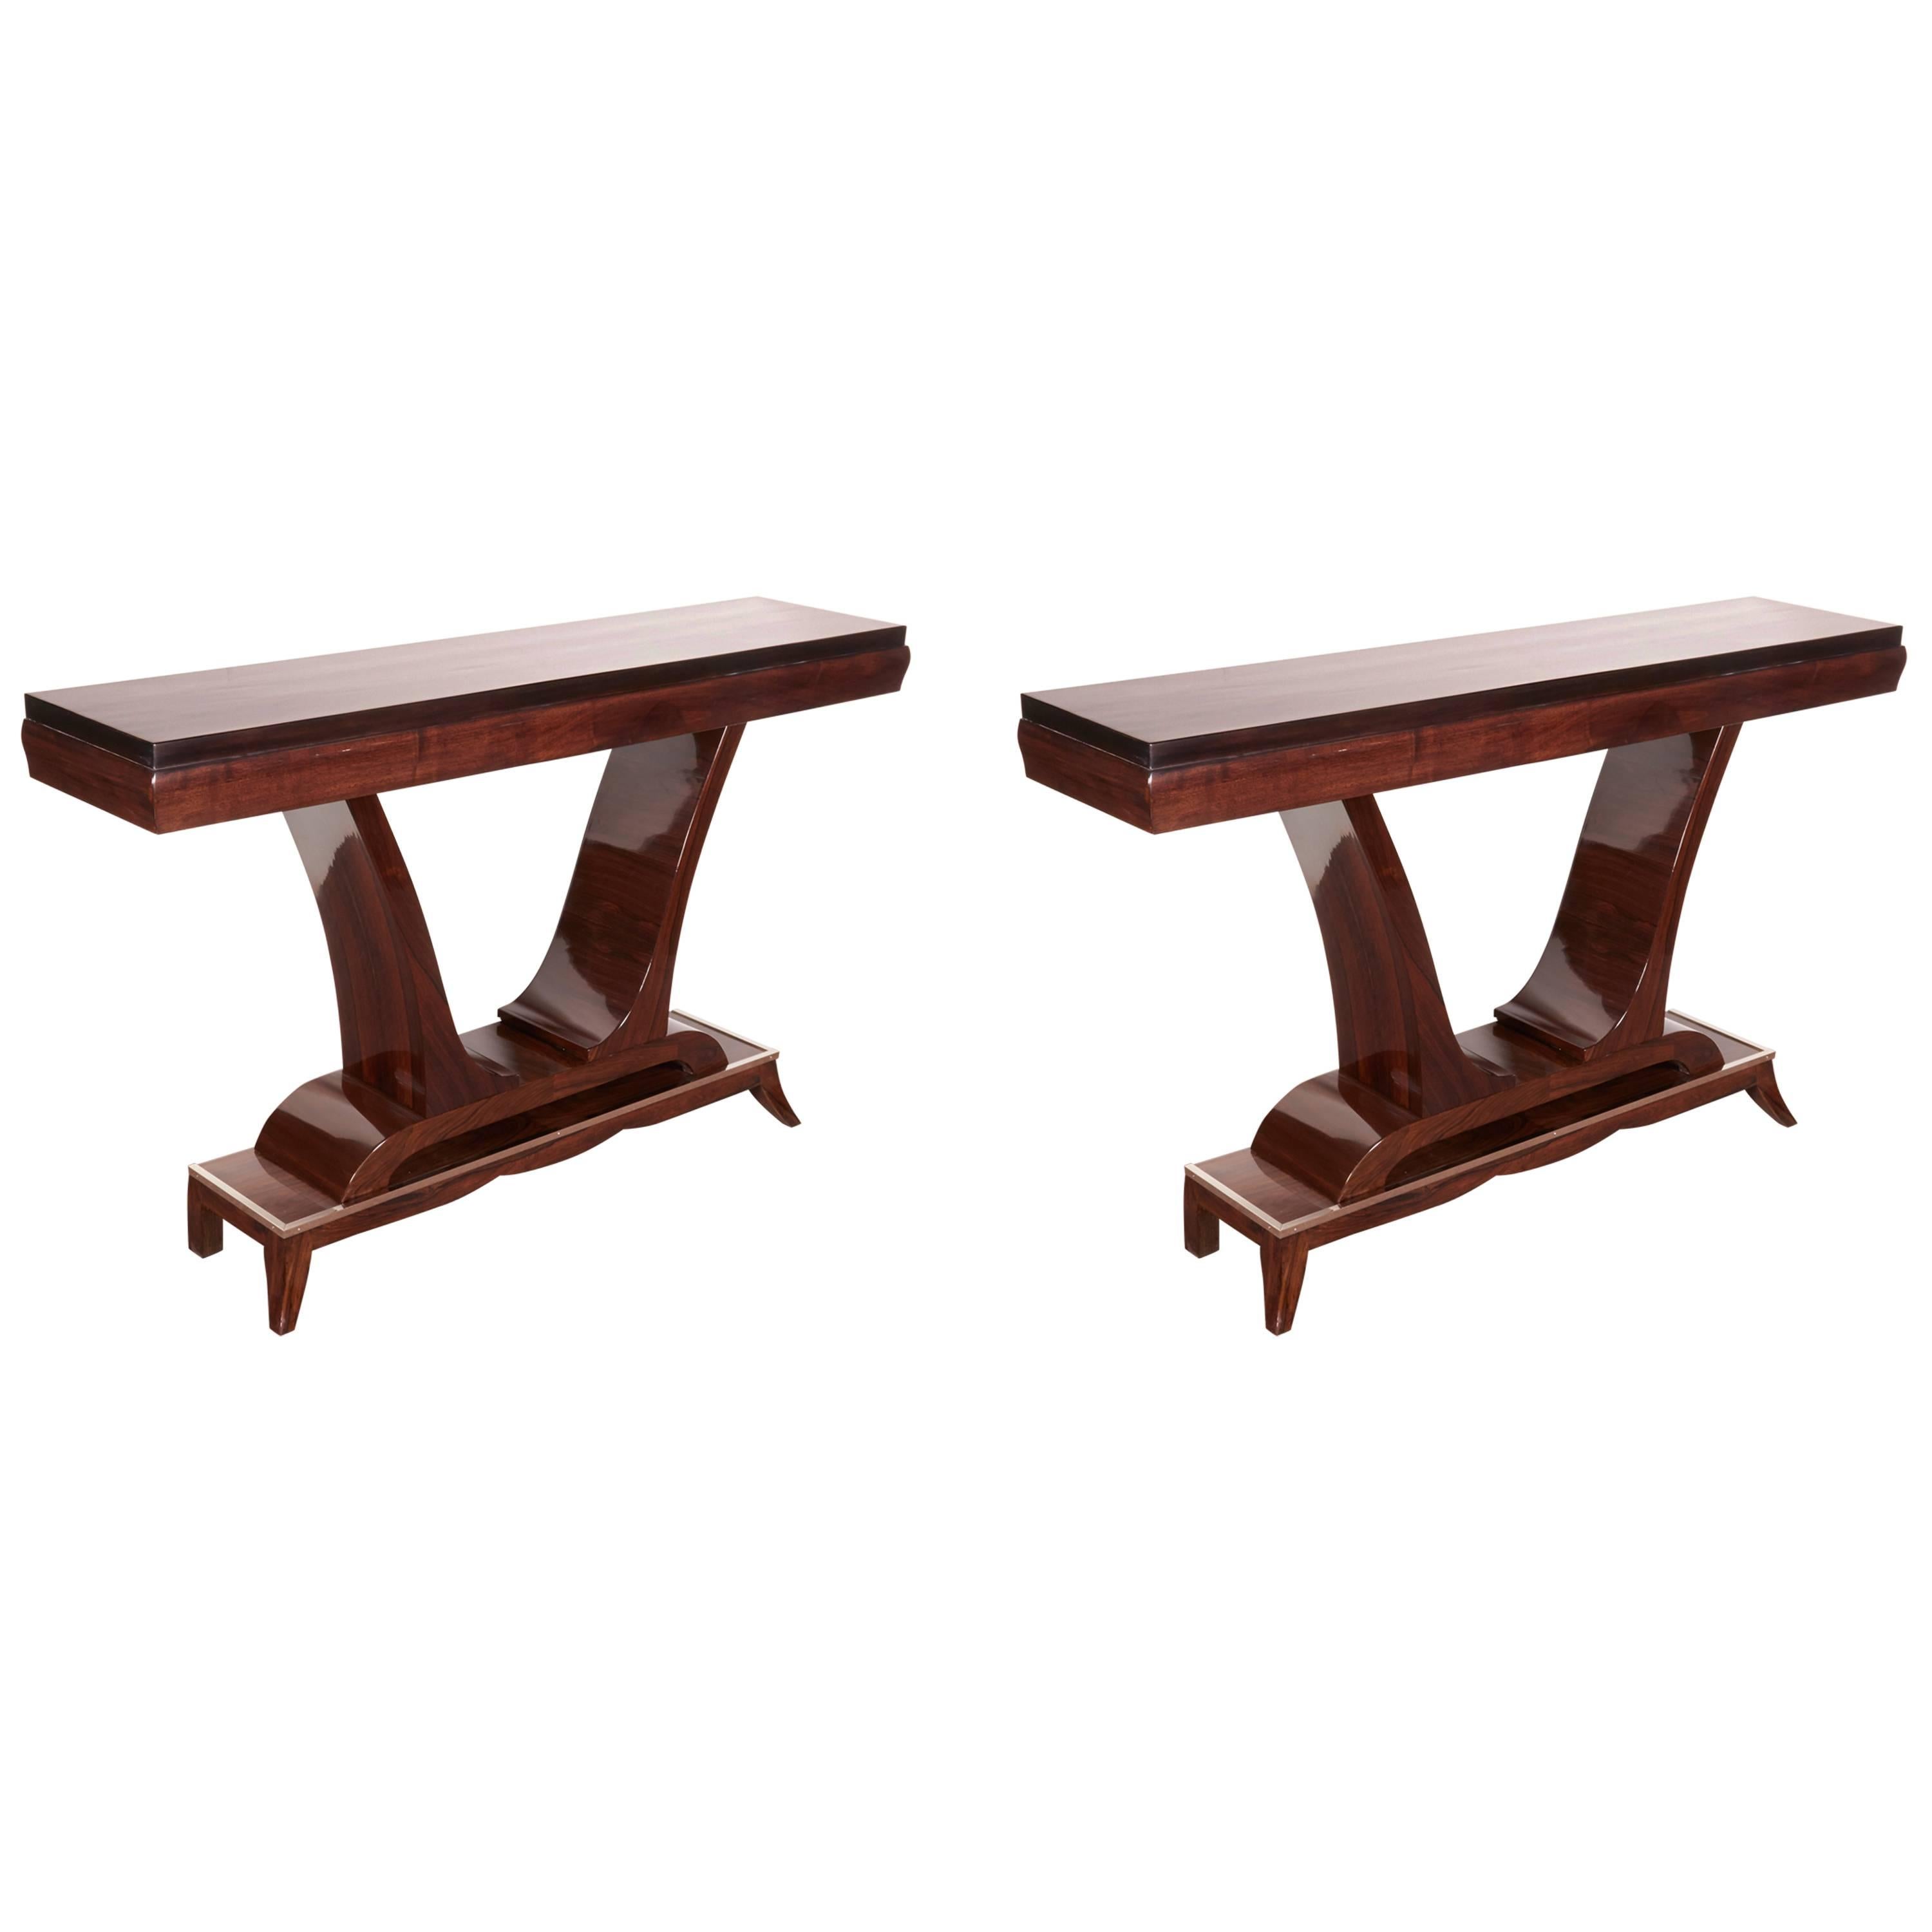 Pair of French Art Deco Elegant Rosewood Consoles with Nickeled Trim